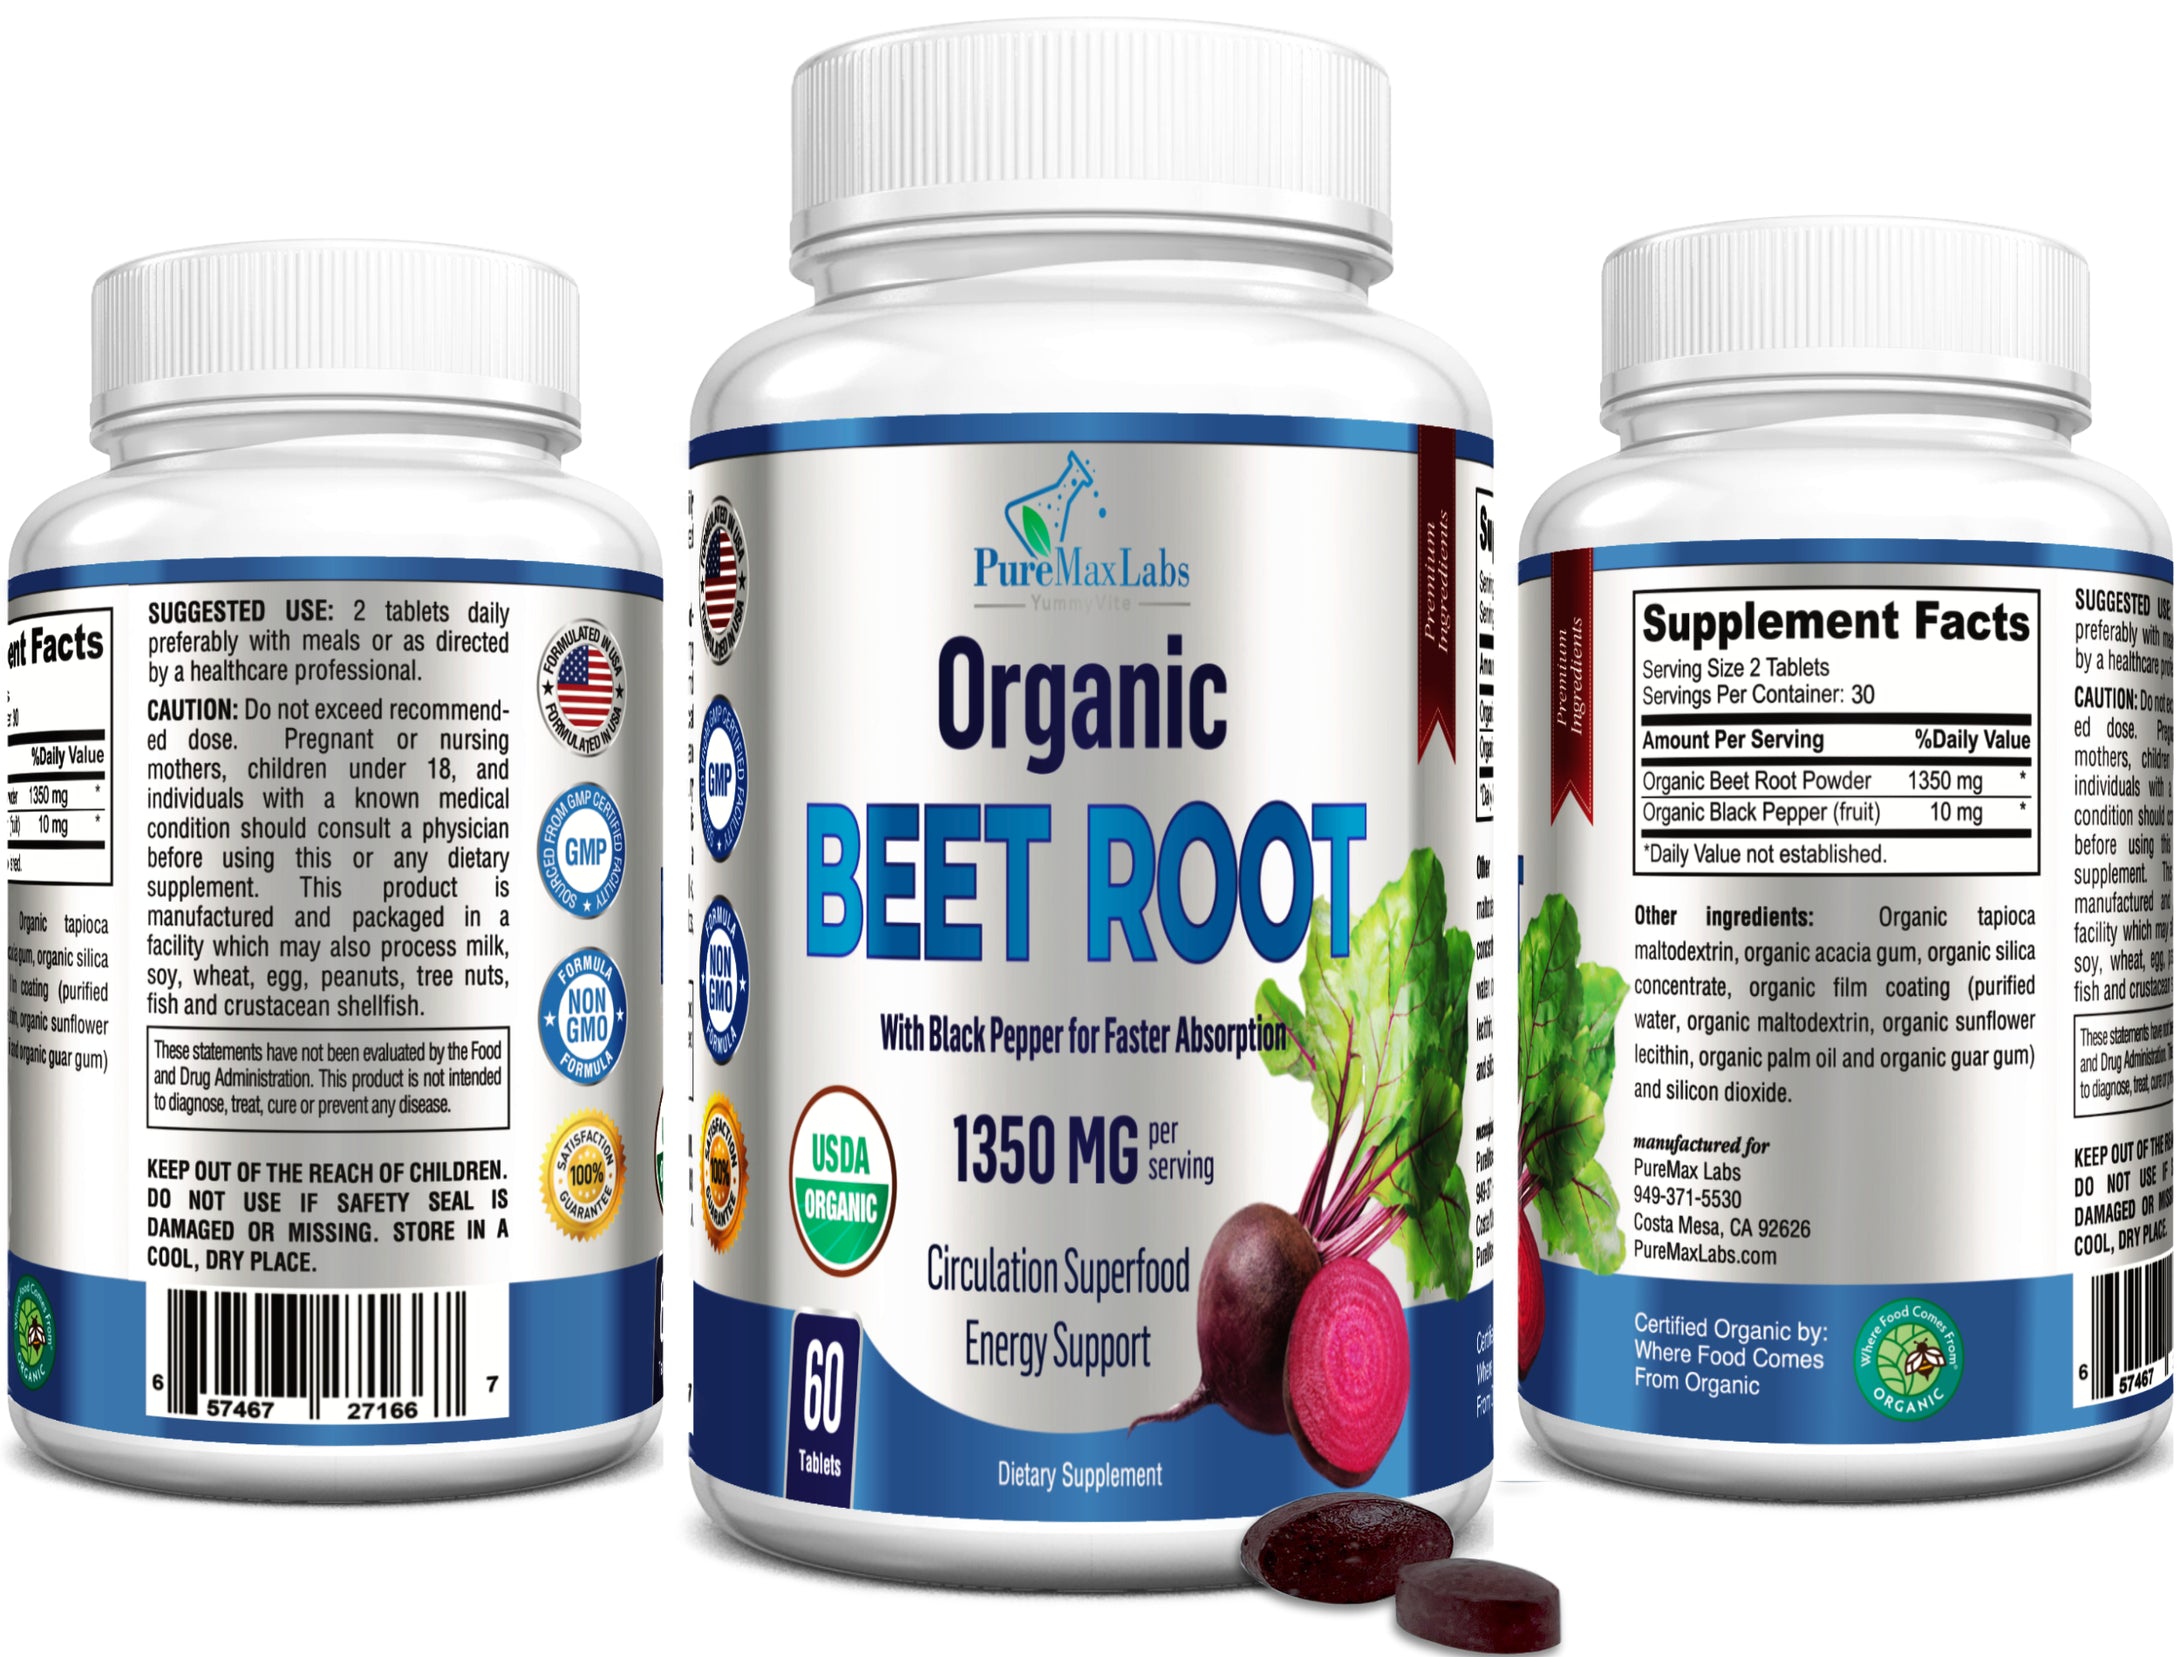 Organic Beet Root Tablets 1350mg with Black Pepper for Faster Absorption - 60 Tablets